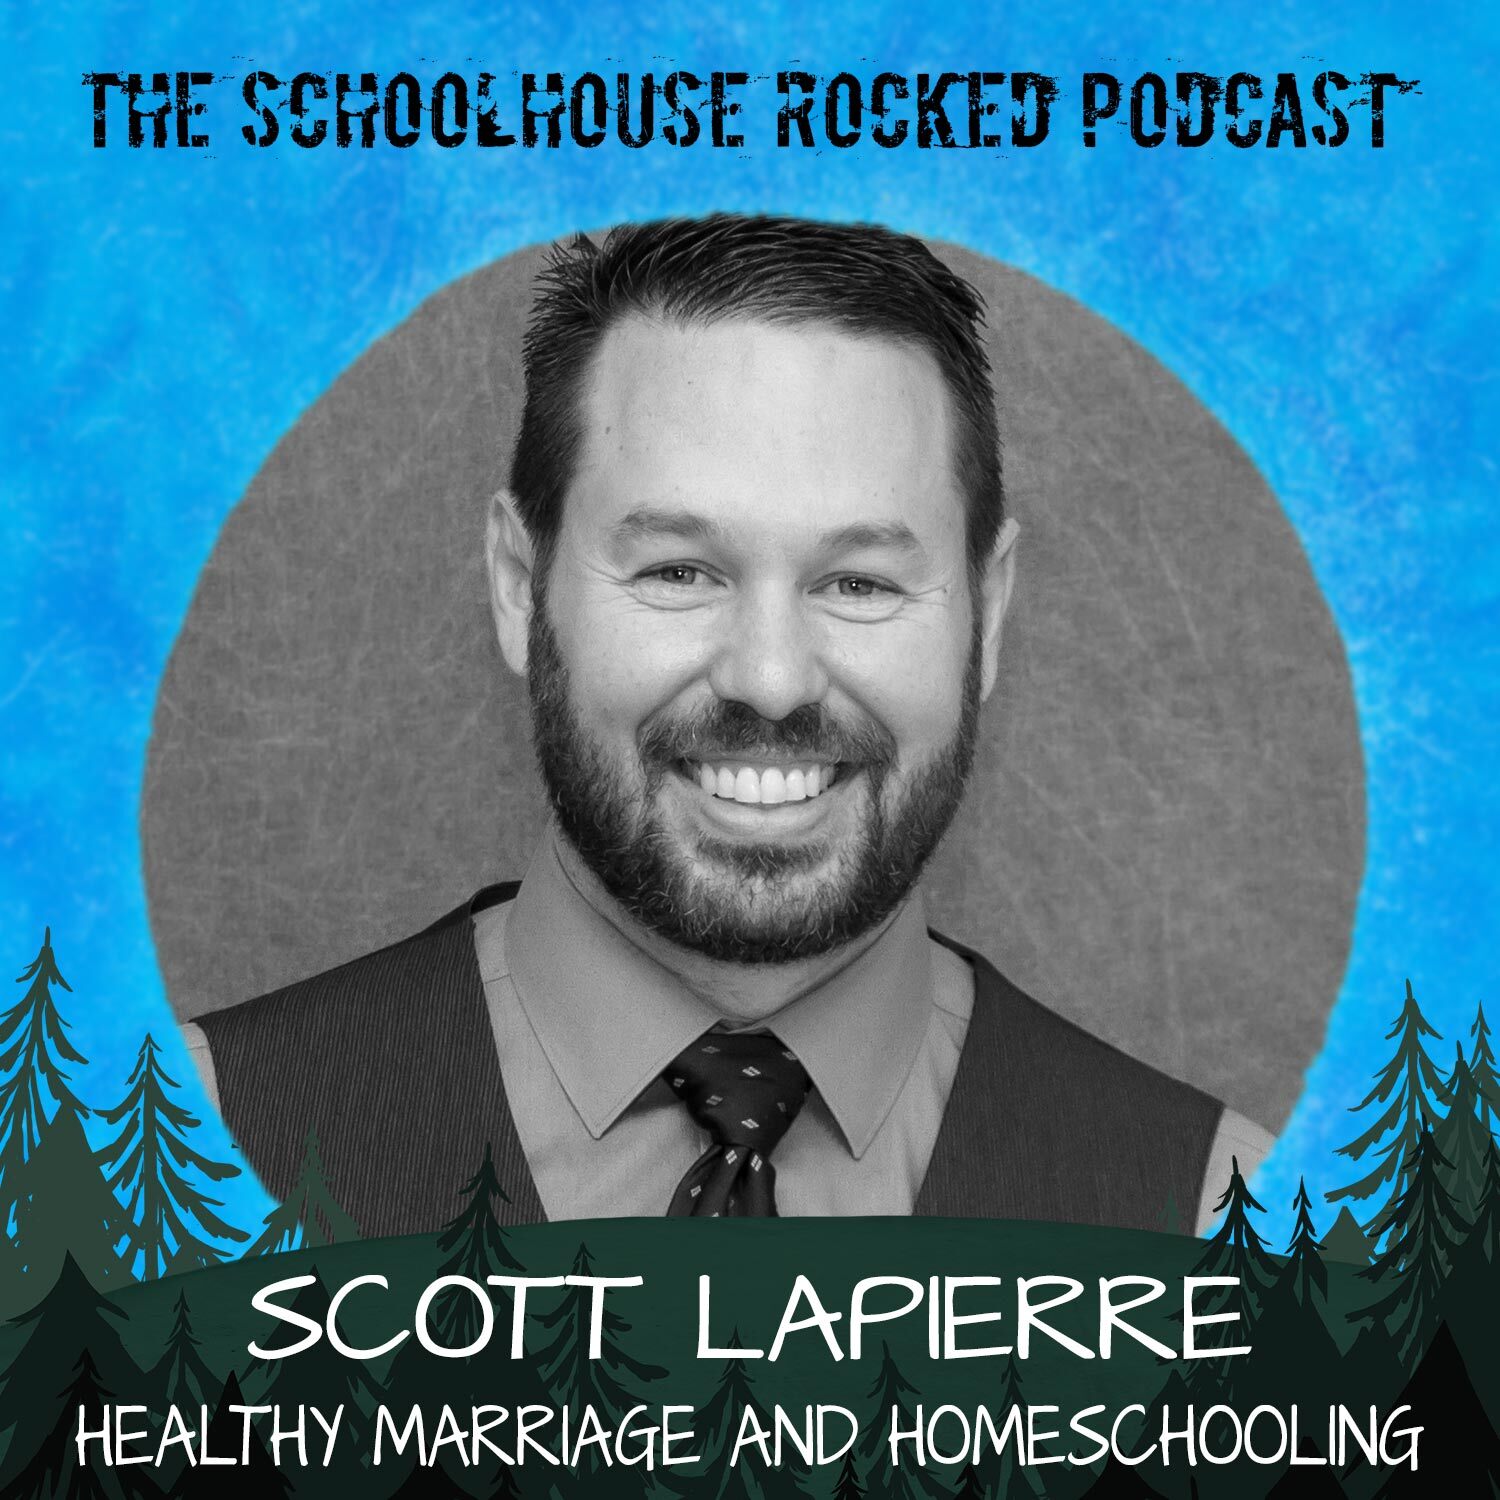 Scott LaPierre - A Healthy Marriage and Homeschooling - Author, Pastor, Speaker